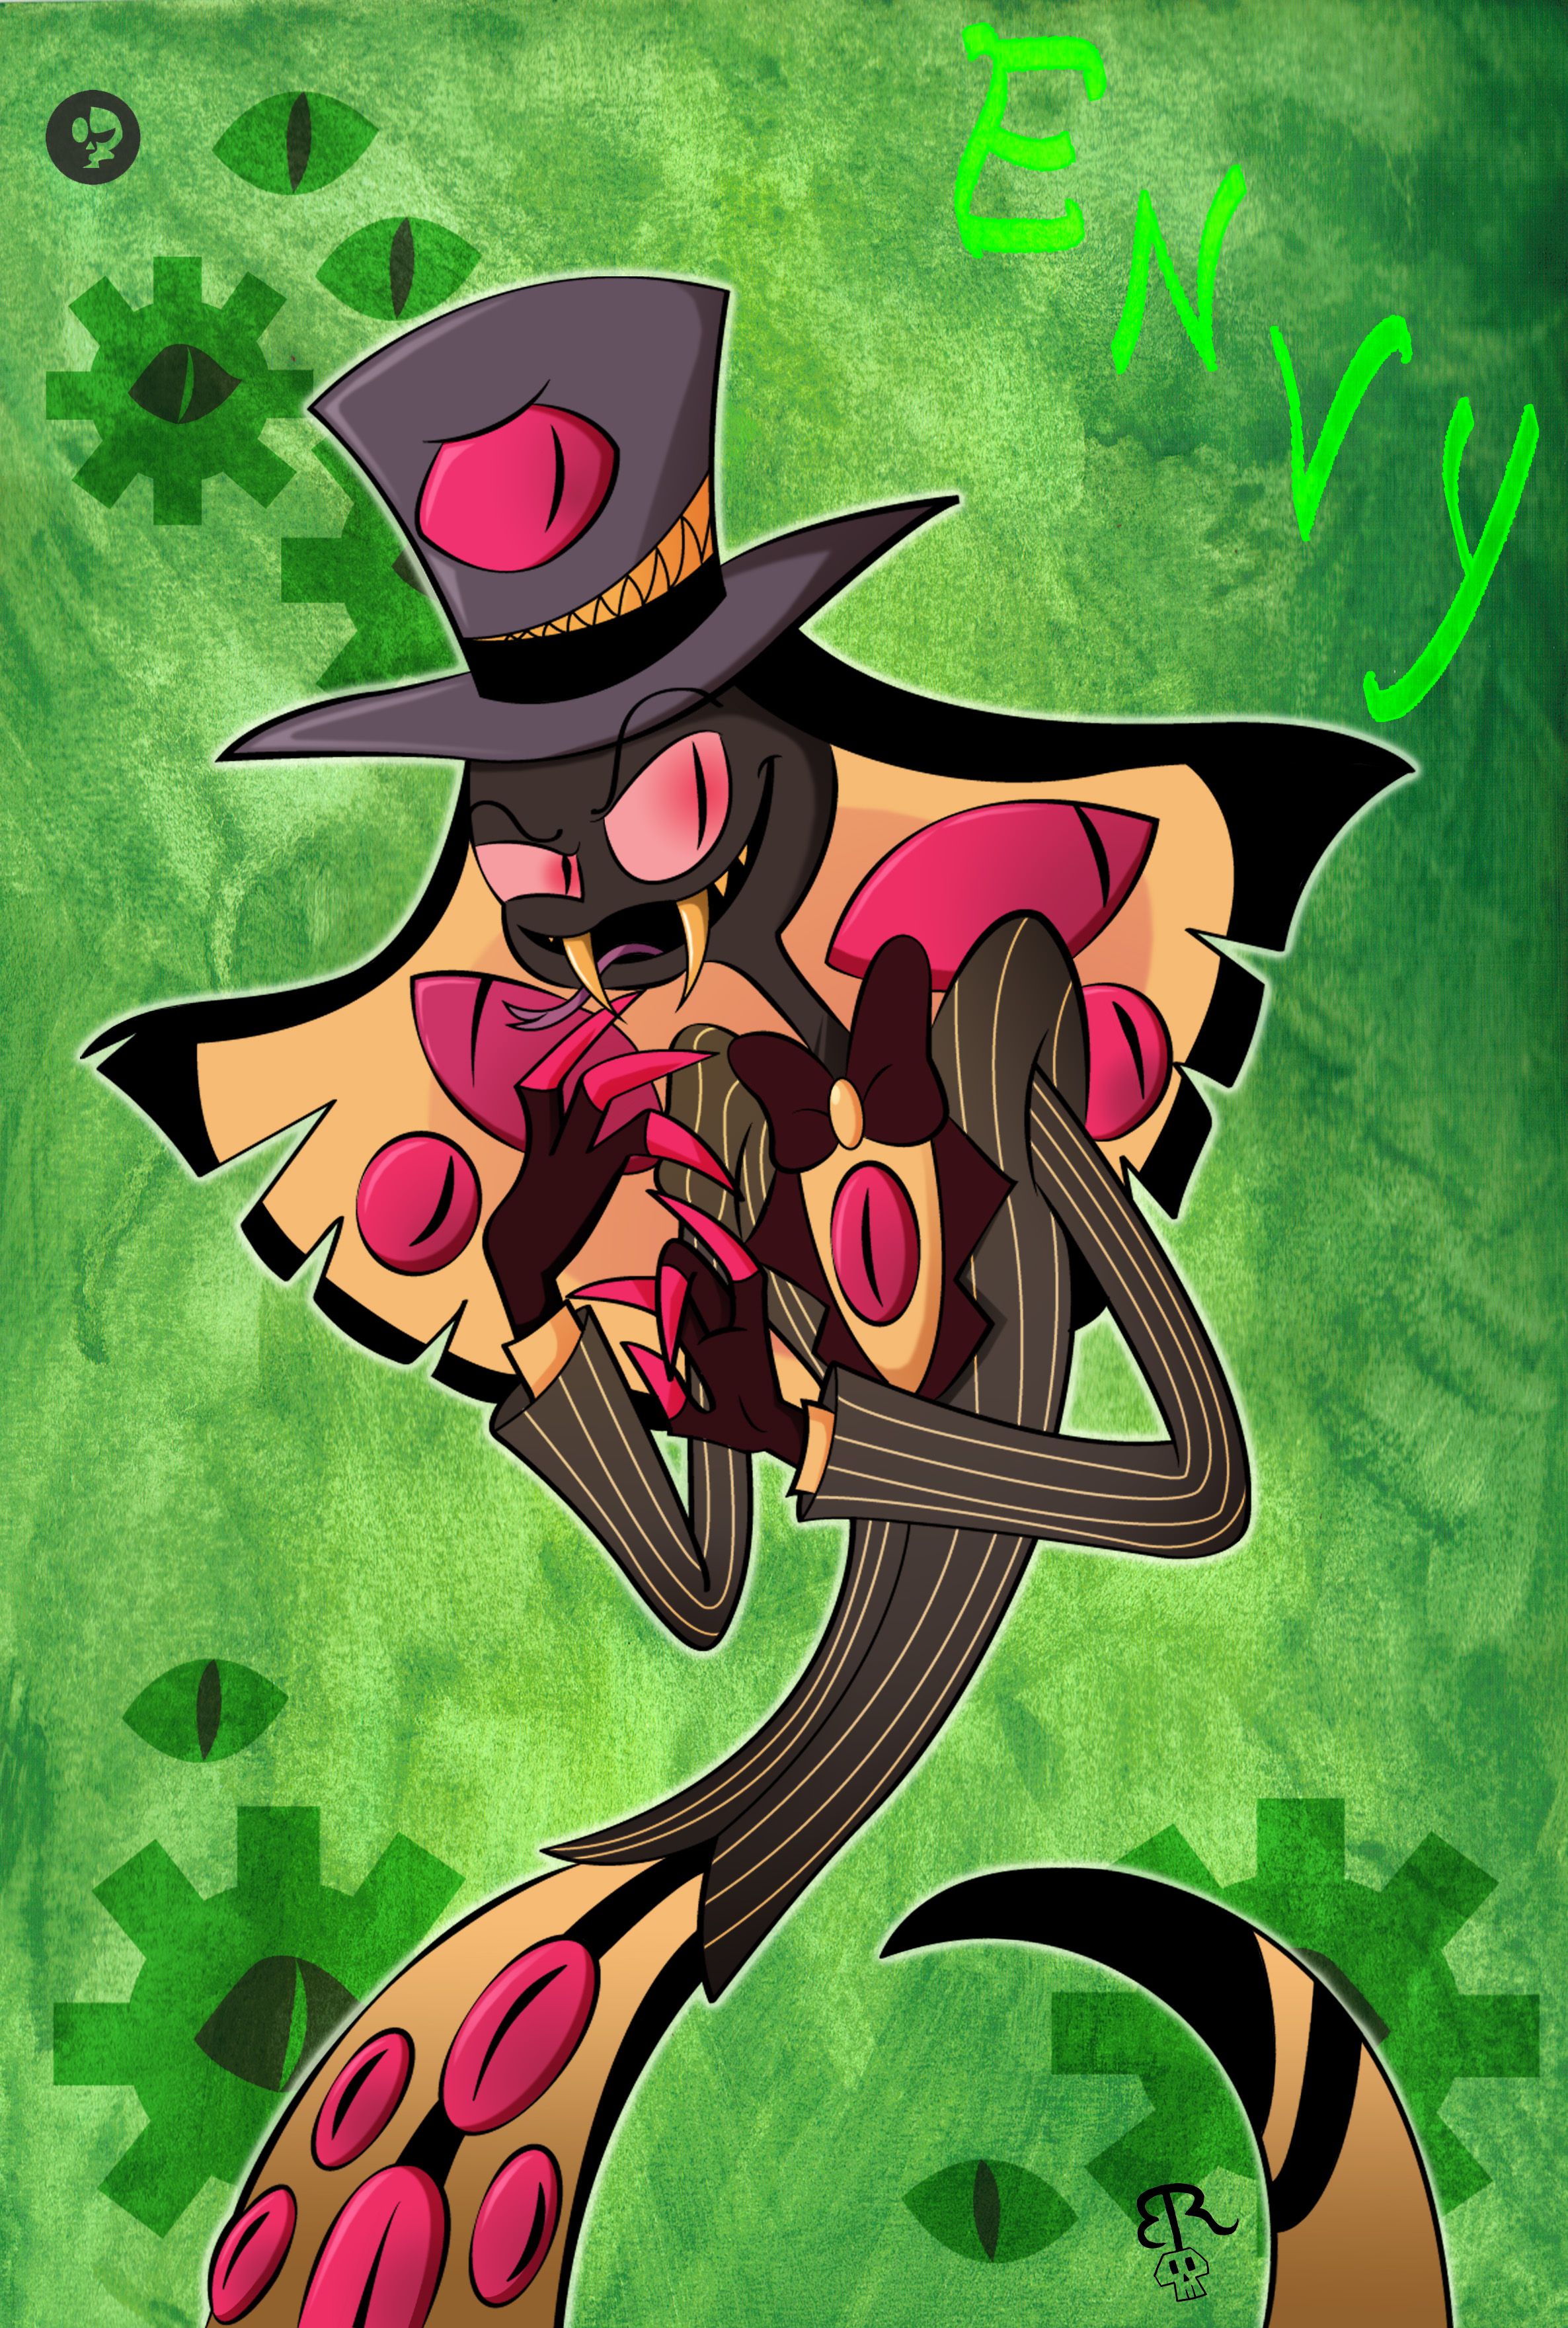 Sir Pentious Envy By Piddies0709 On Newgrounds